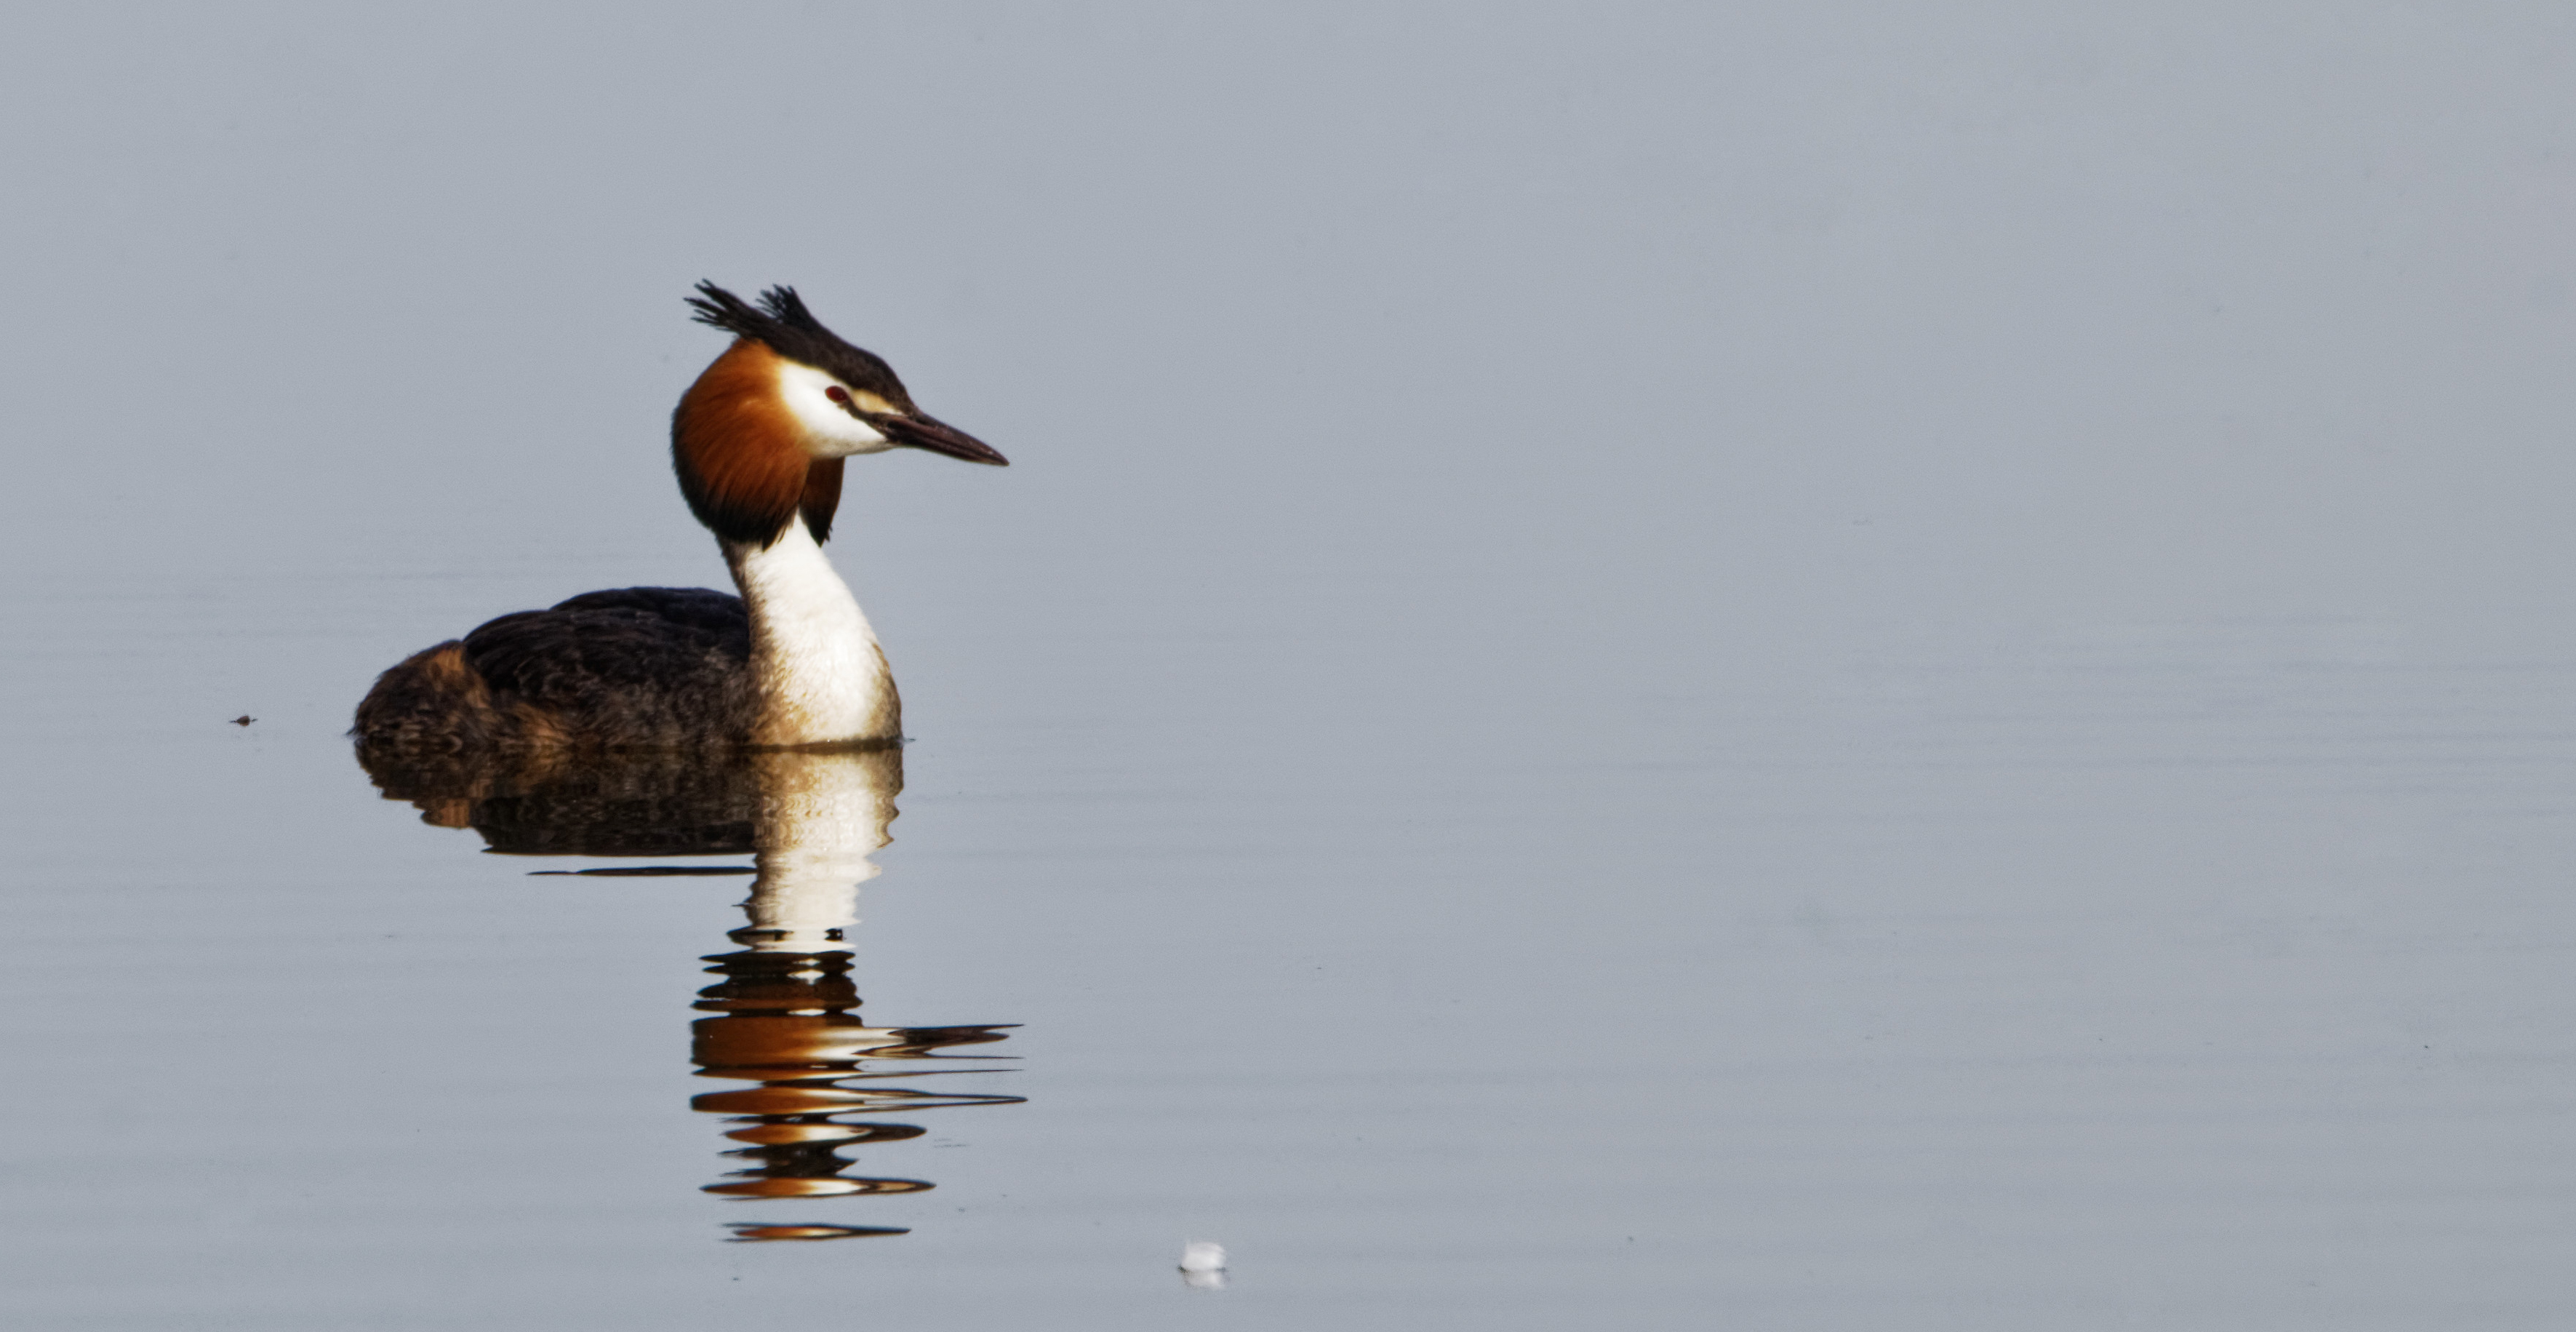 Great crested grebe1 May 23